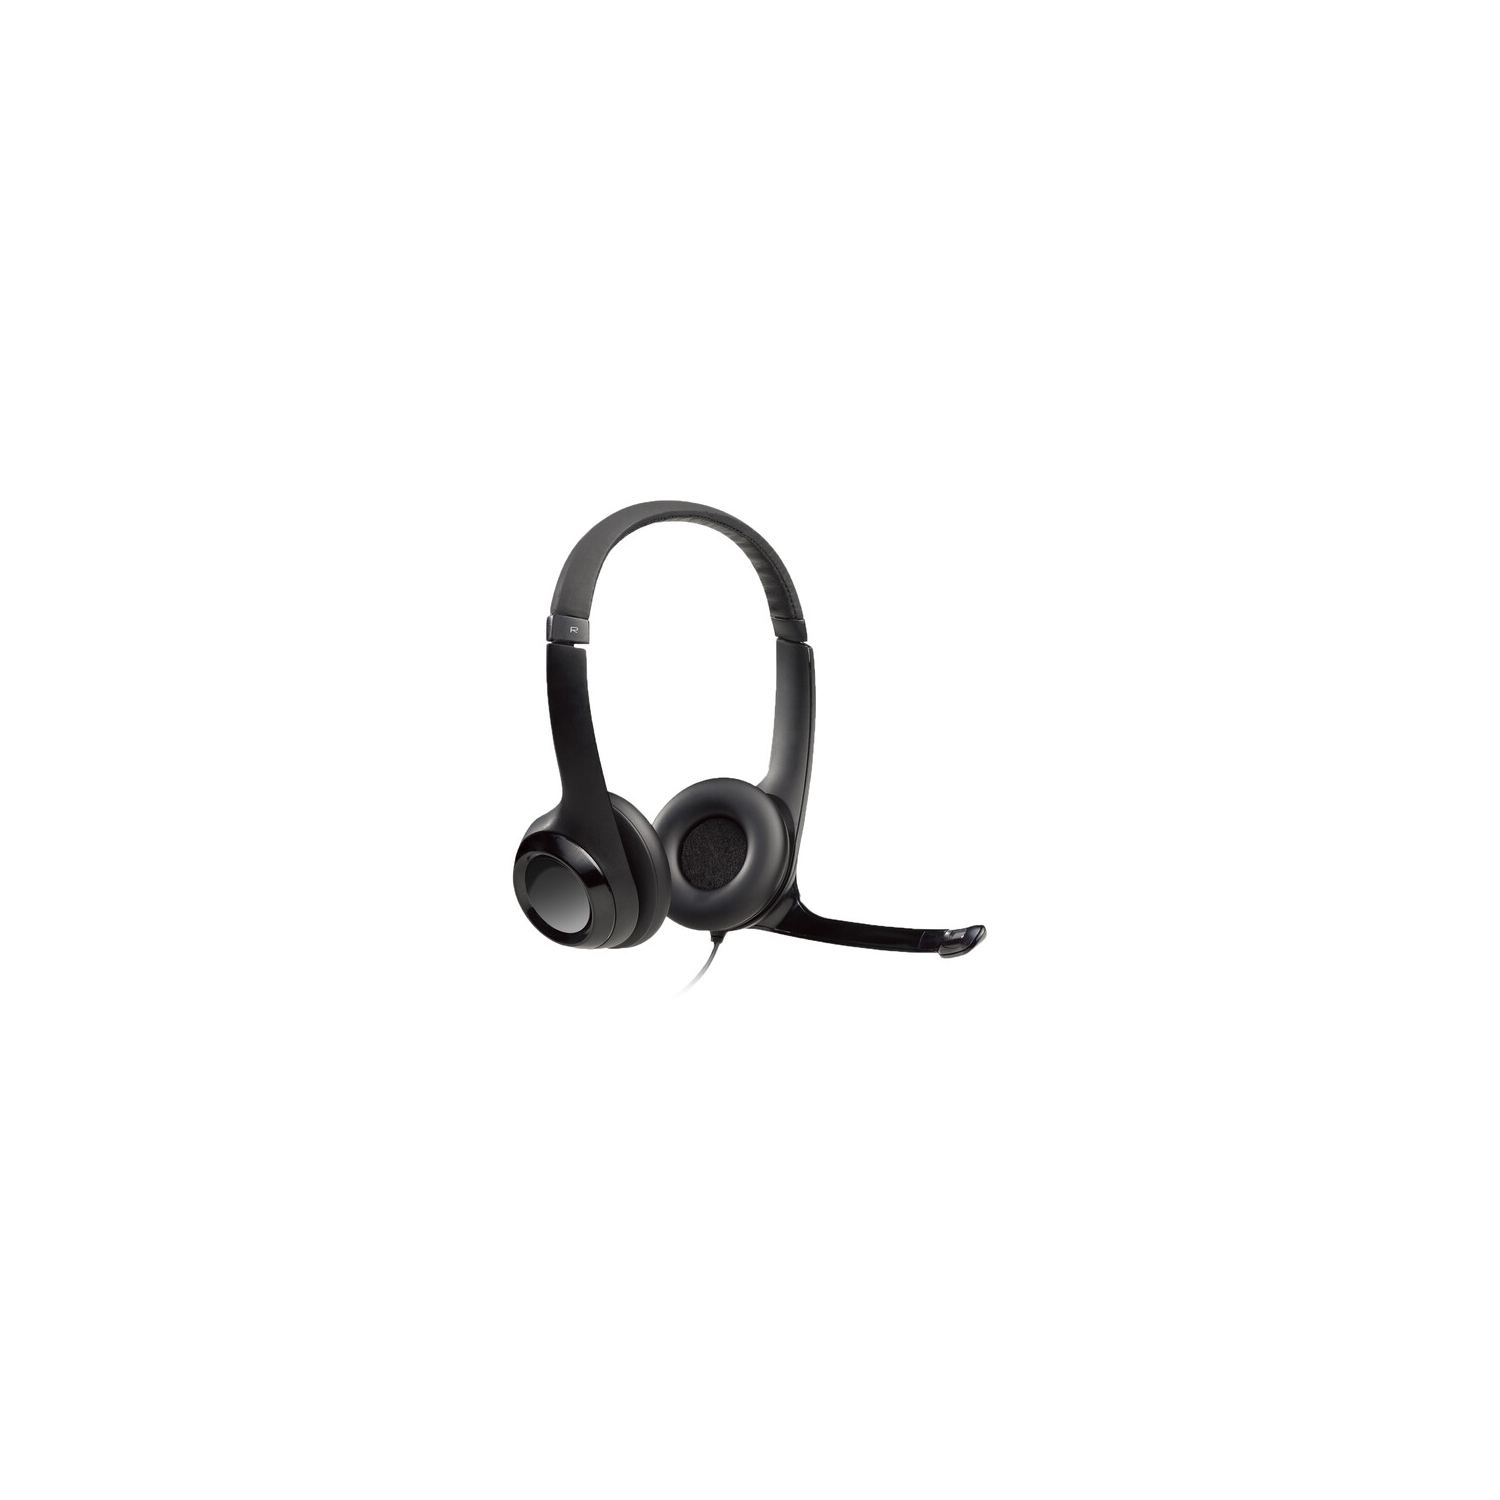 Logitech H390 On-Ear Noise Cancelling Headphone with Optimal Comfort and USB Connectivity